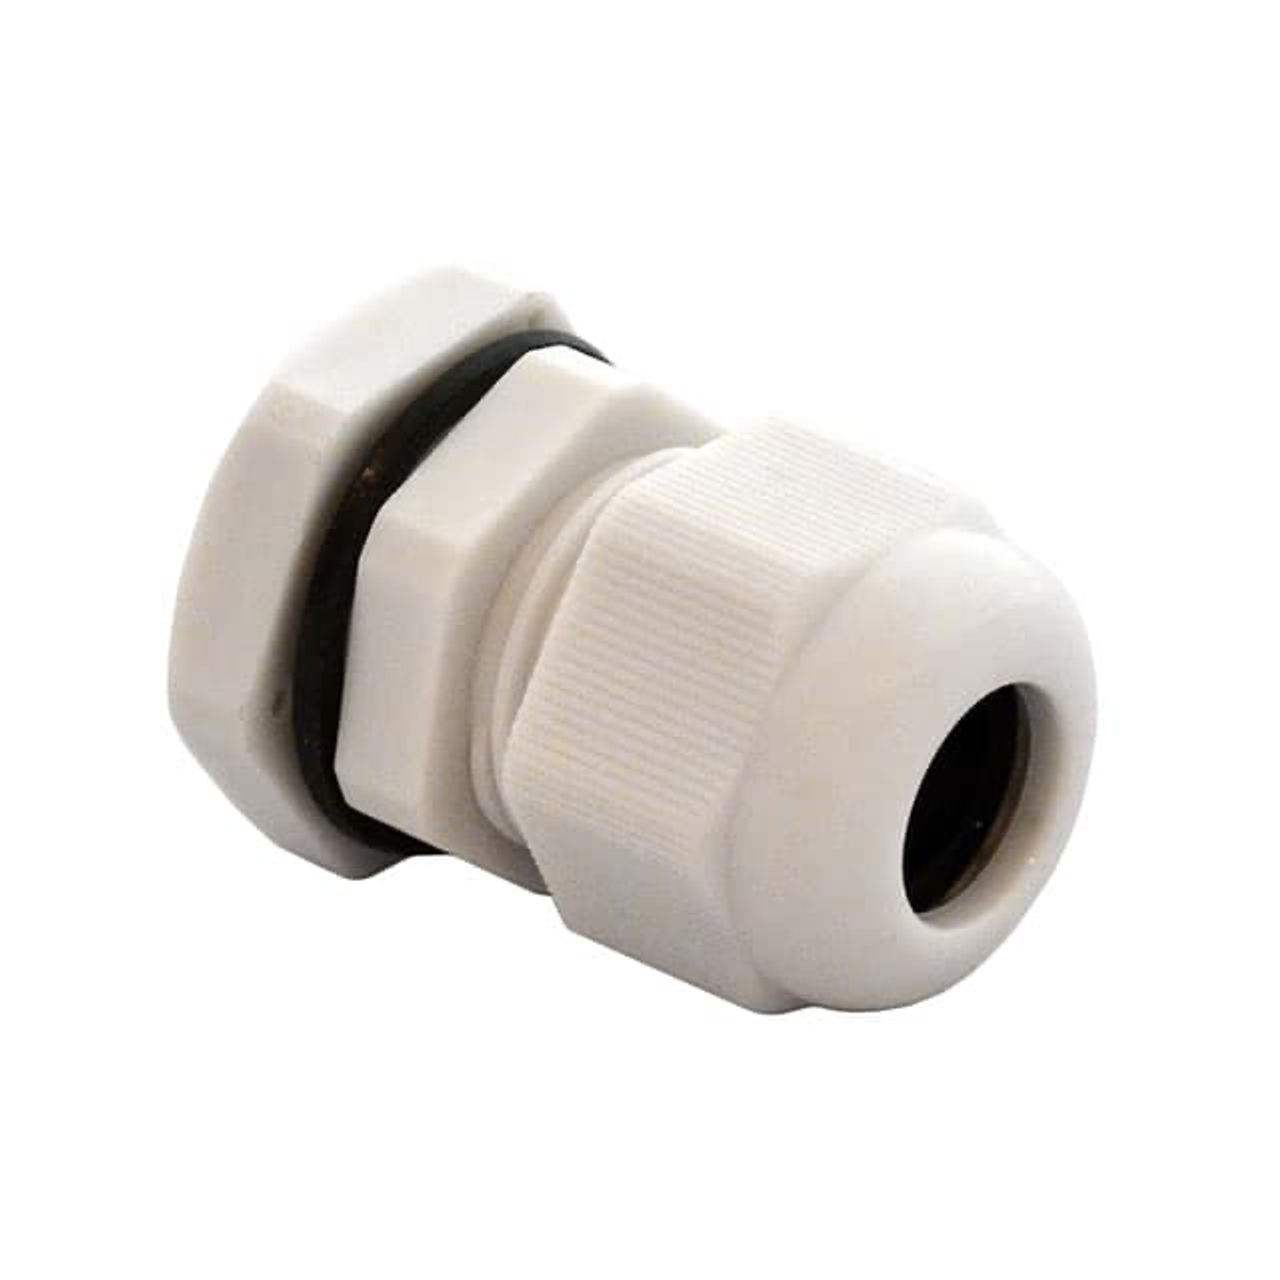 Bud Industries Inc. IPG-22211-G Cable Glands